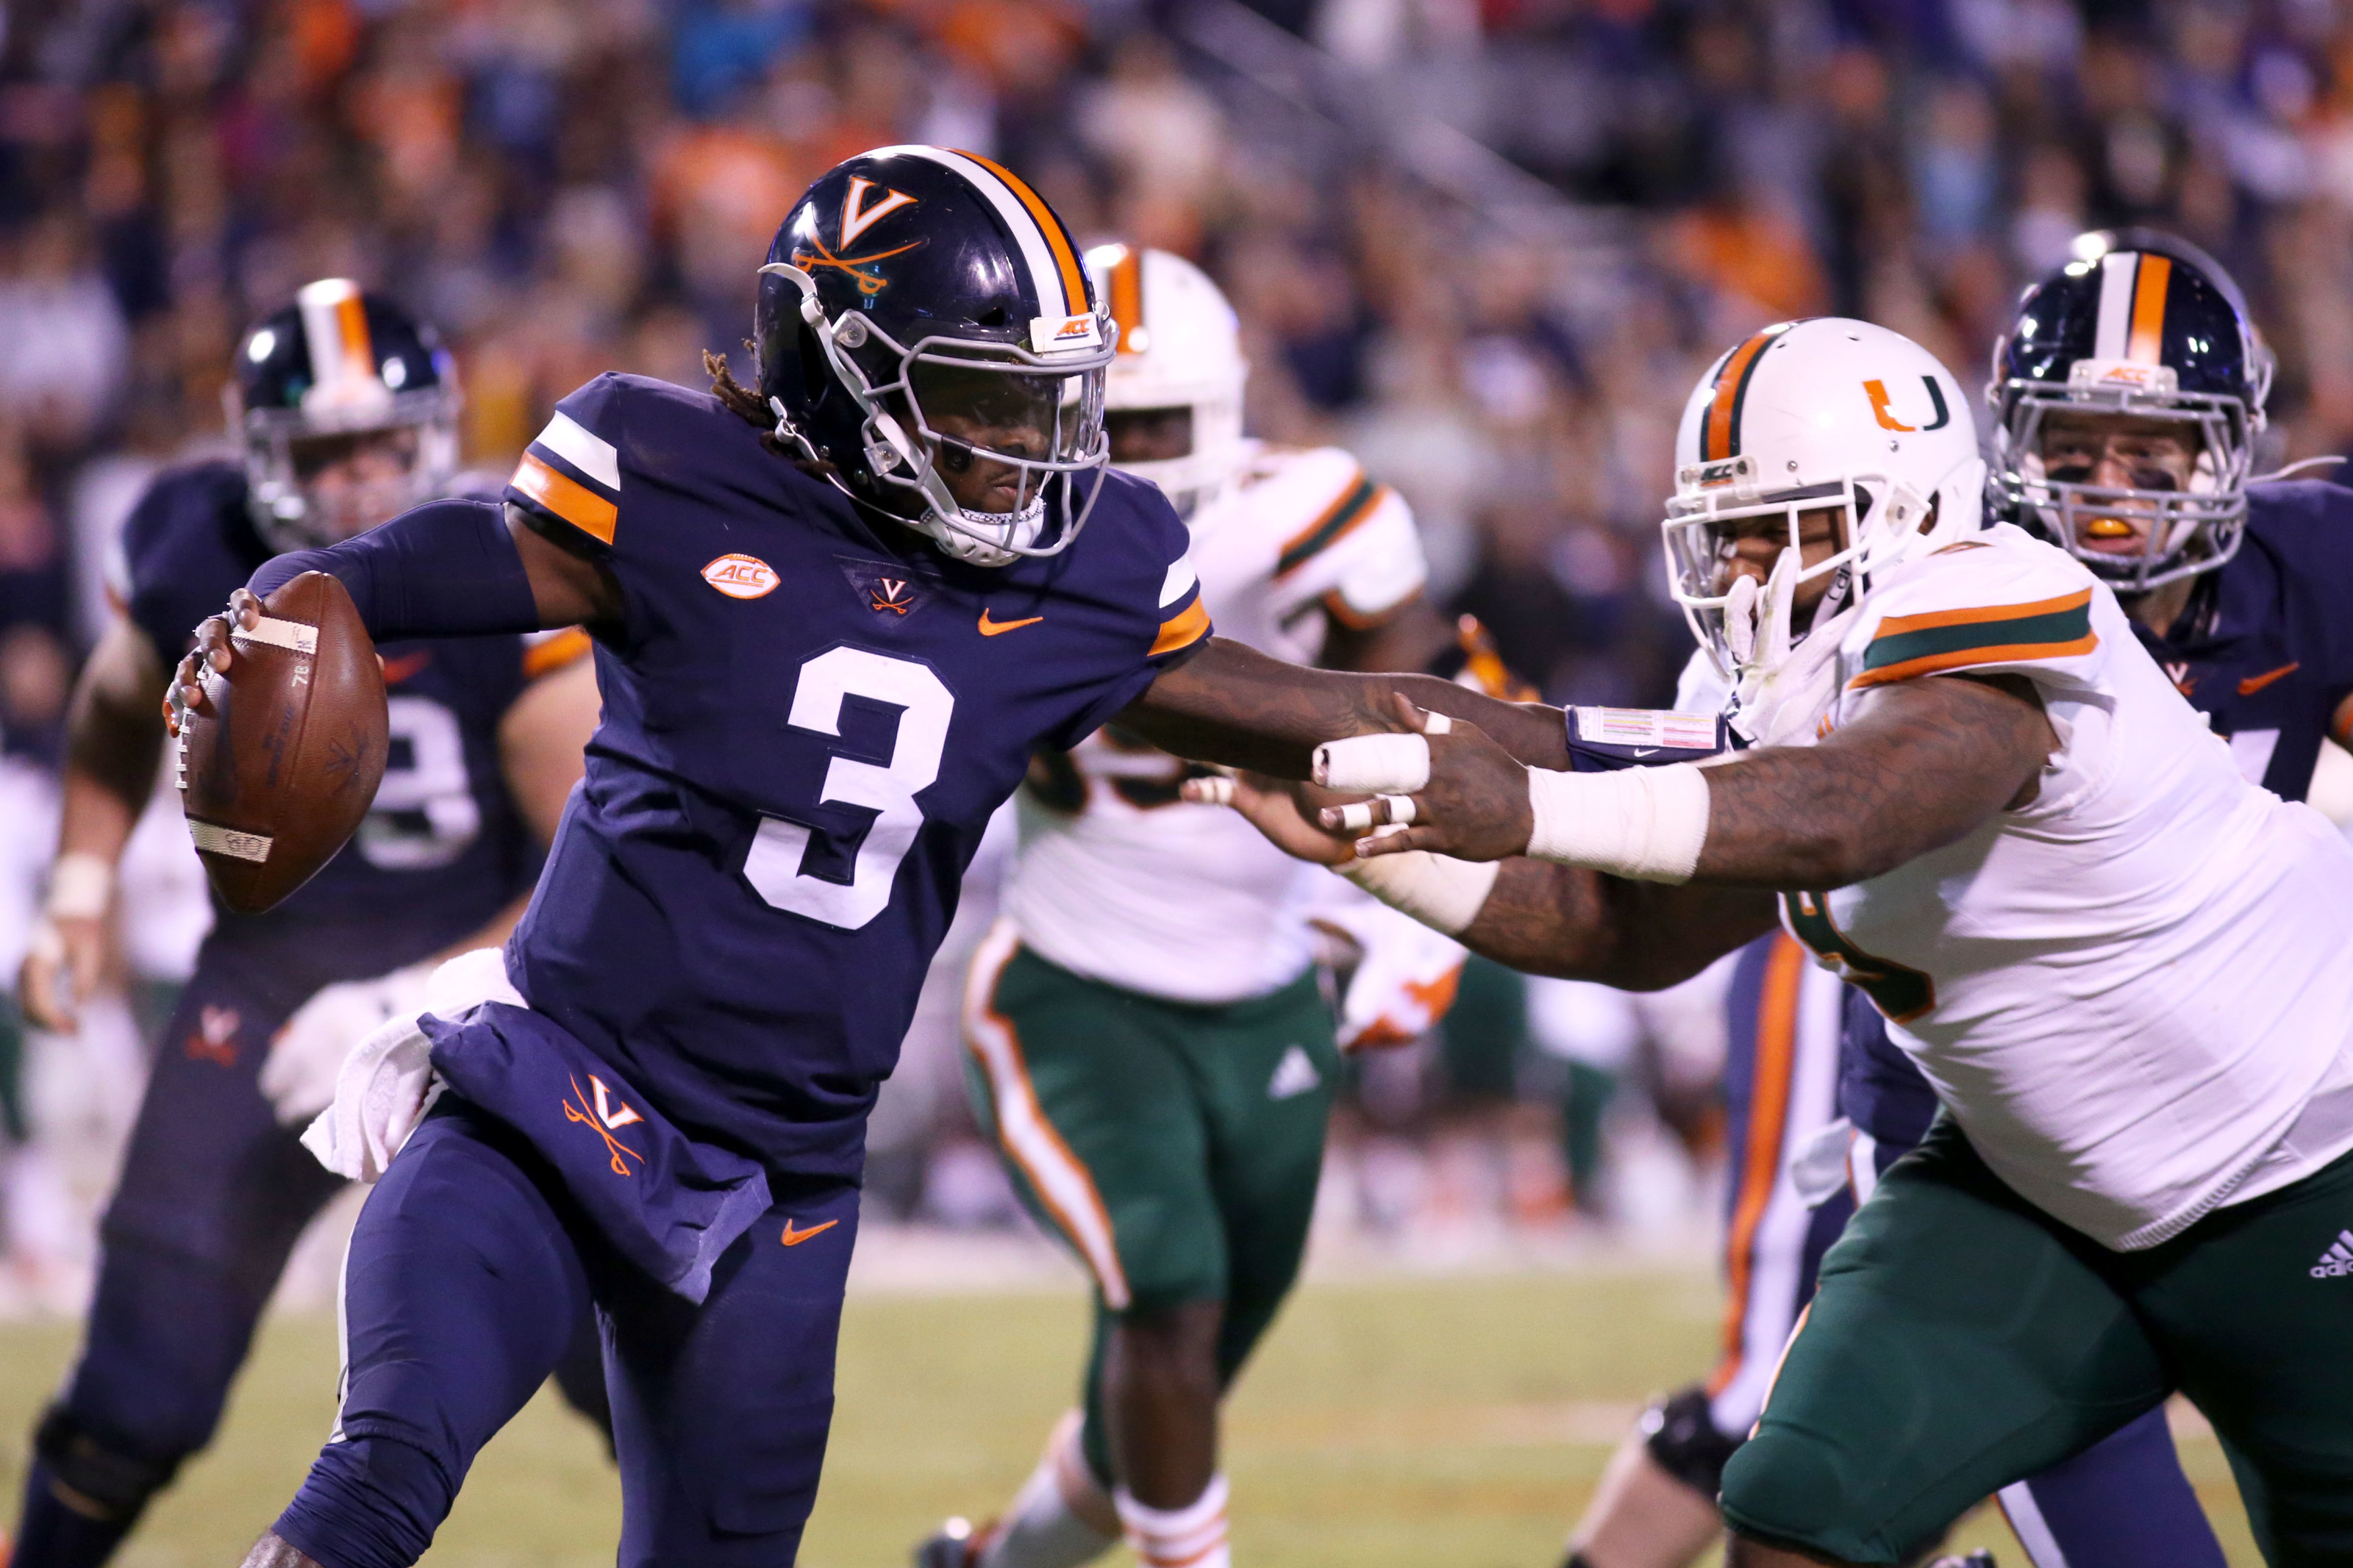 Expect Malik Rosier to start Pinstripe Bowl if N'Kosi Perry is suspended